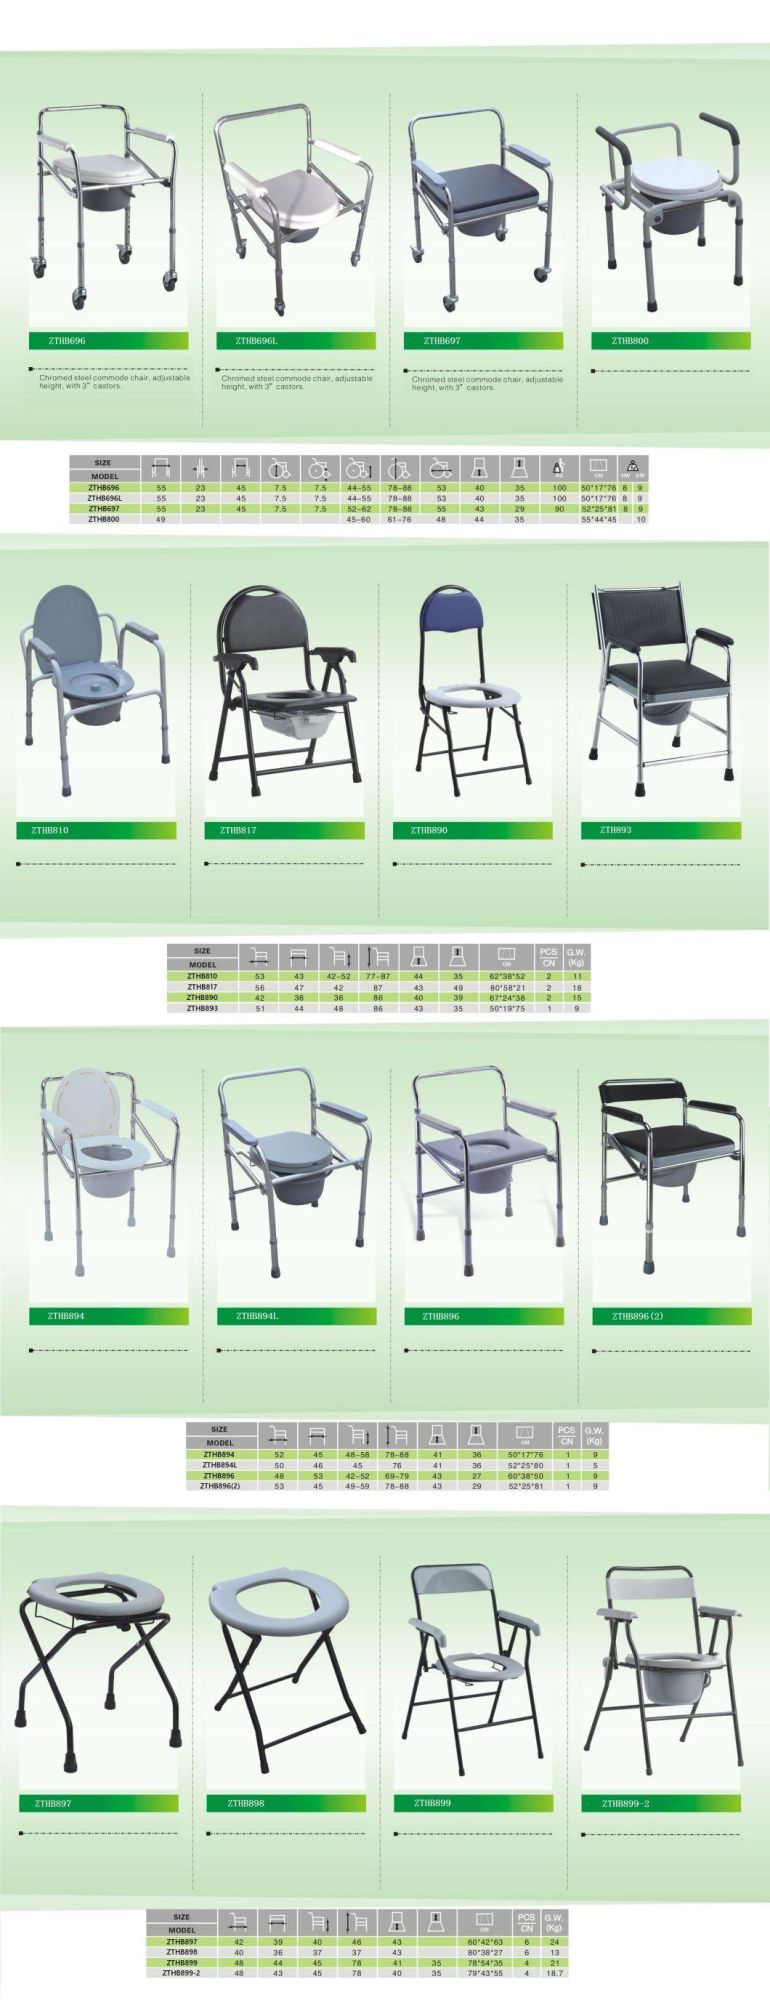 Antiskid Height Adjust Lightweight Commode Toilet Chair Elderly/Disable Patient People Rehabilitation Products Aluminum Nursing Safety Seat with Home Care